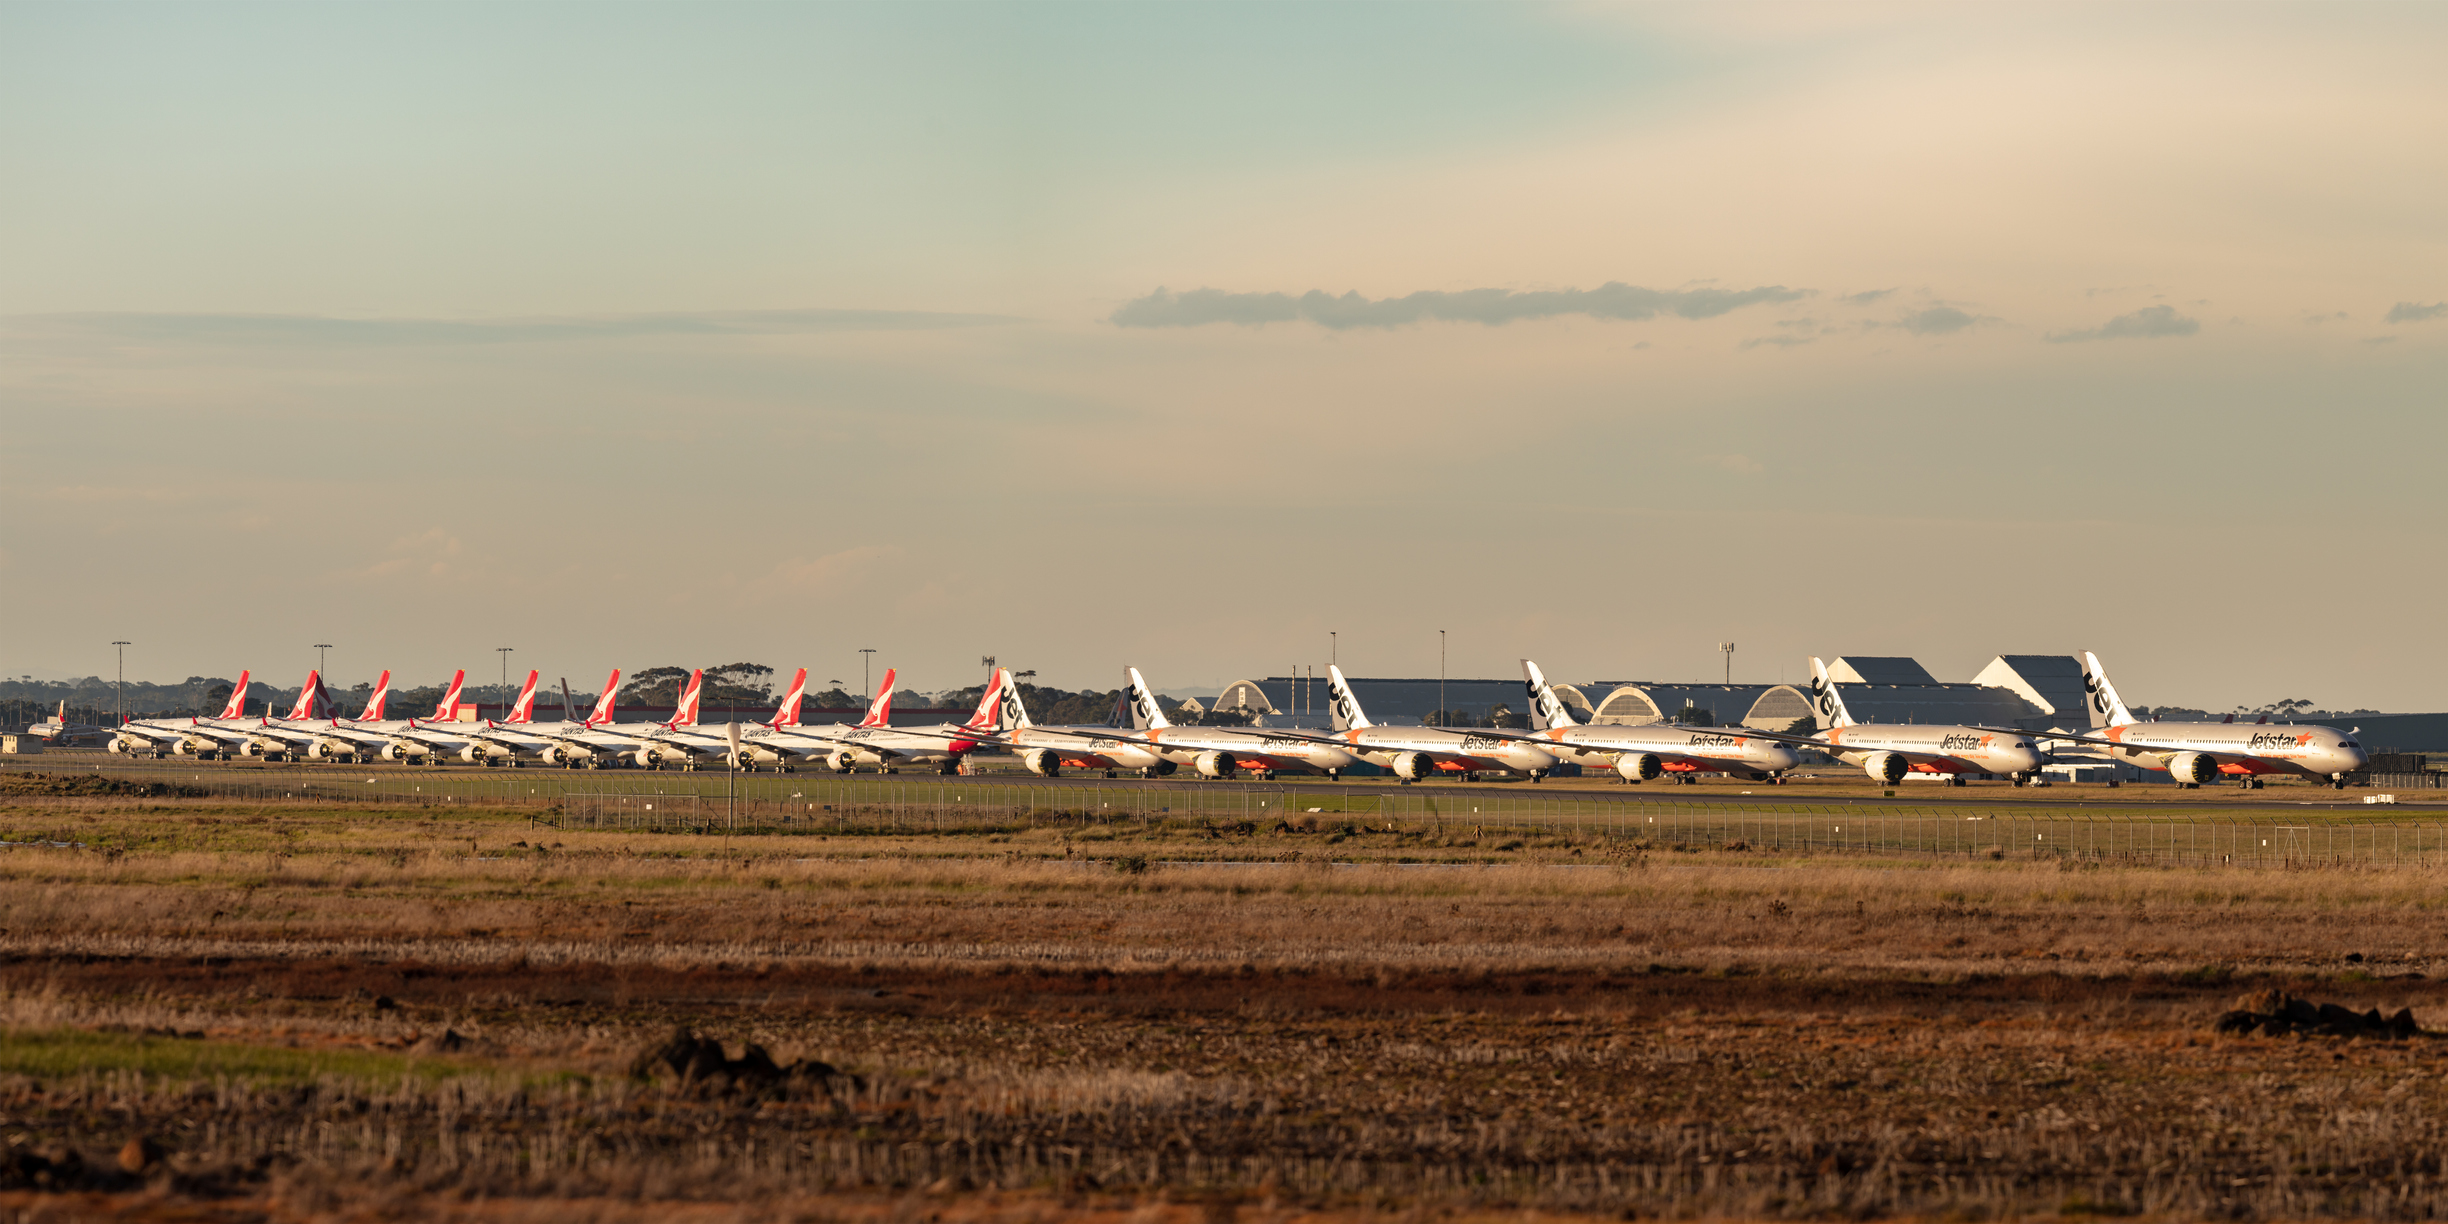 Line of airplanes parked on an airfield, grounded due to the pandemic. 